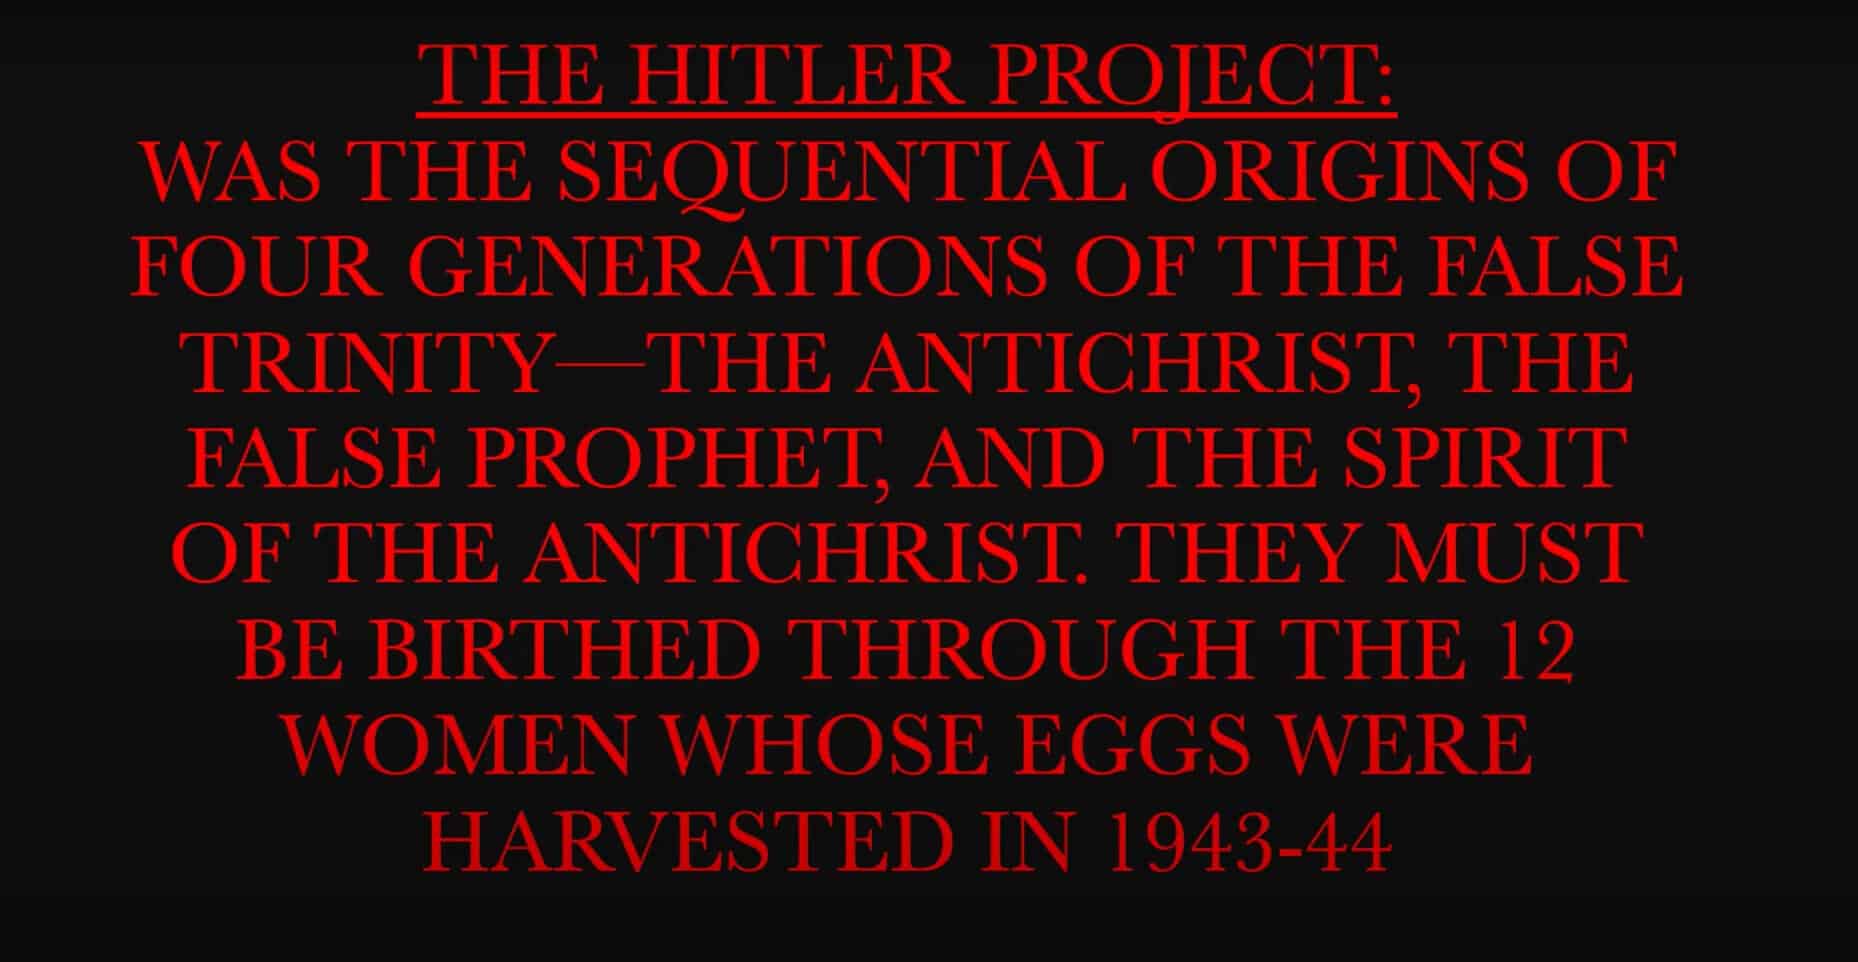 What is the Hitler Project